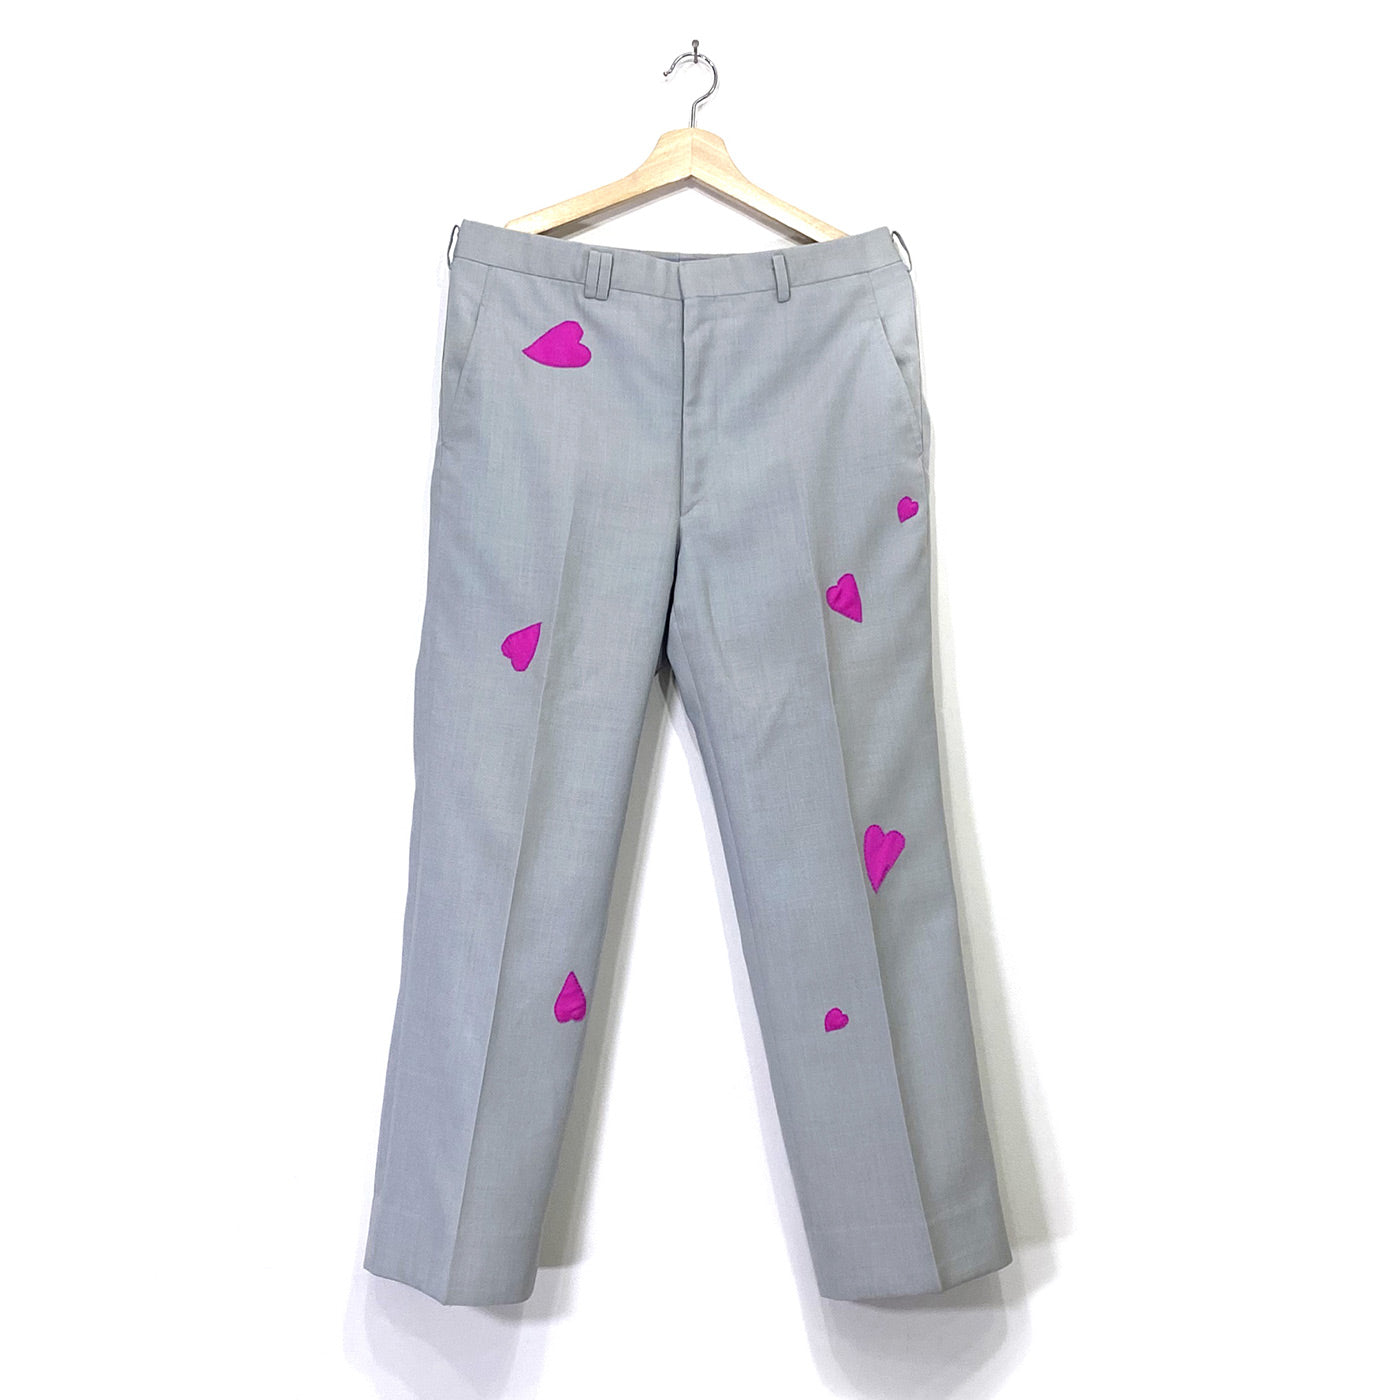 The front of grey dress pants with seven intense pink hearts sewn in various locations